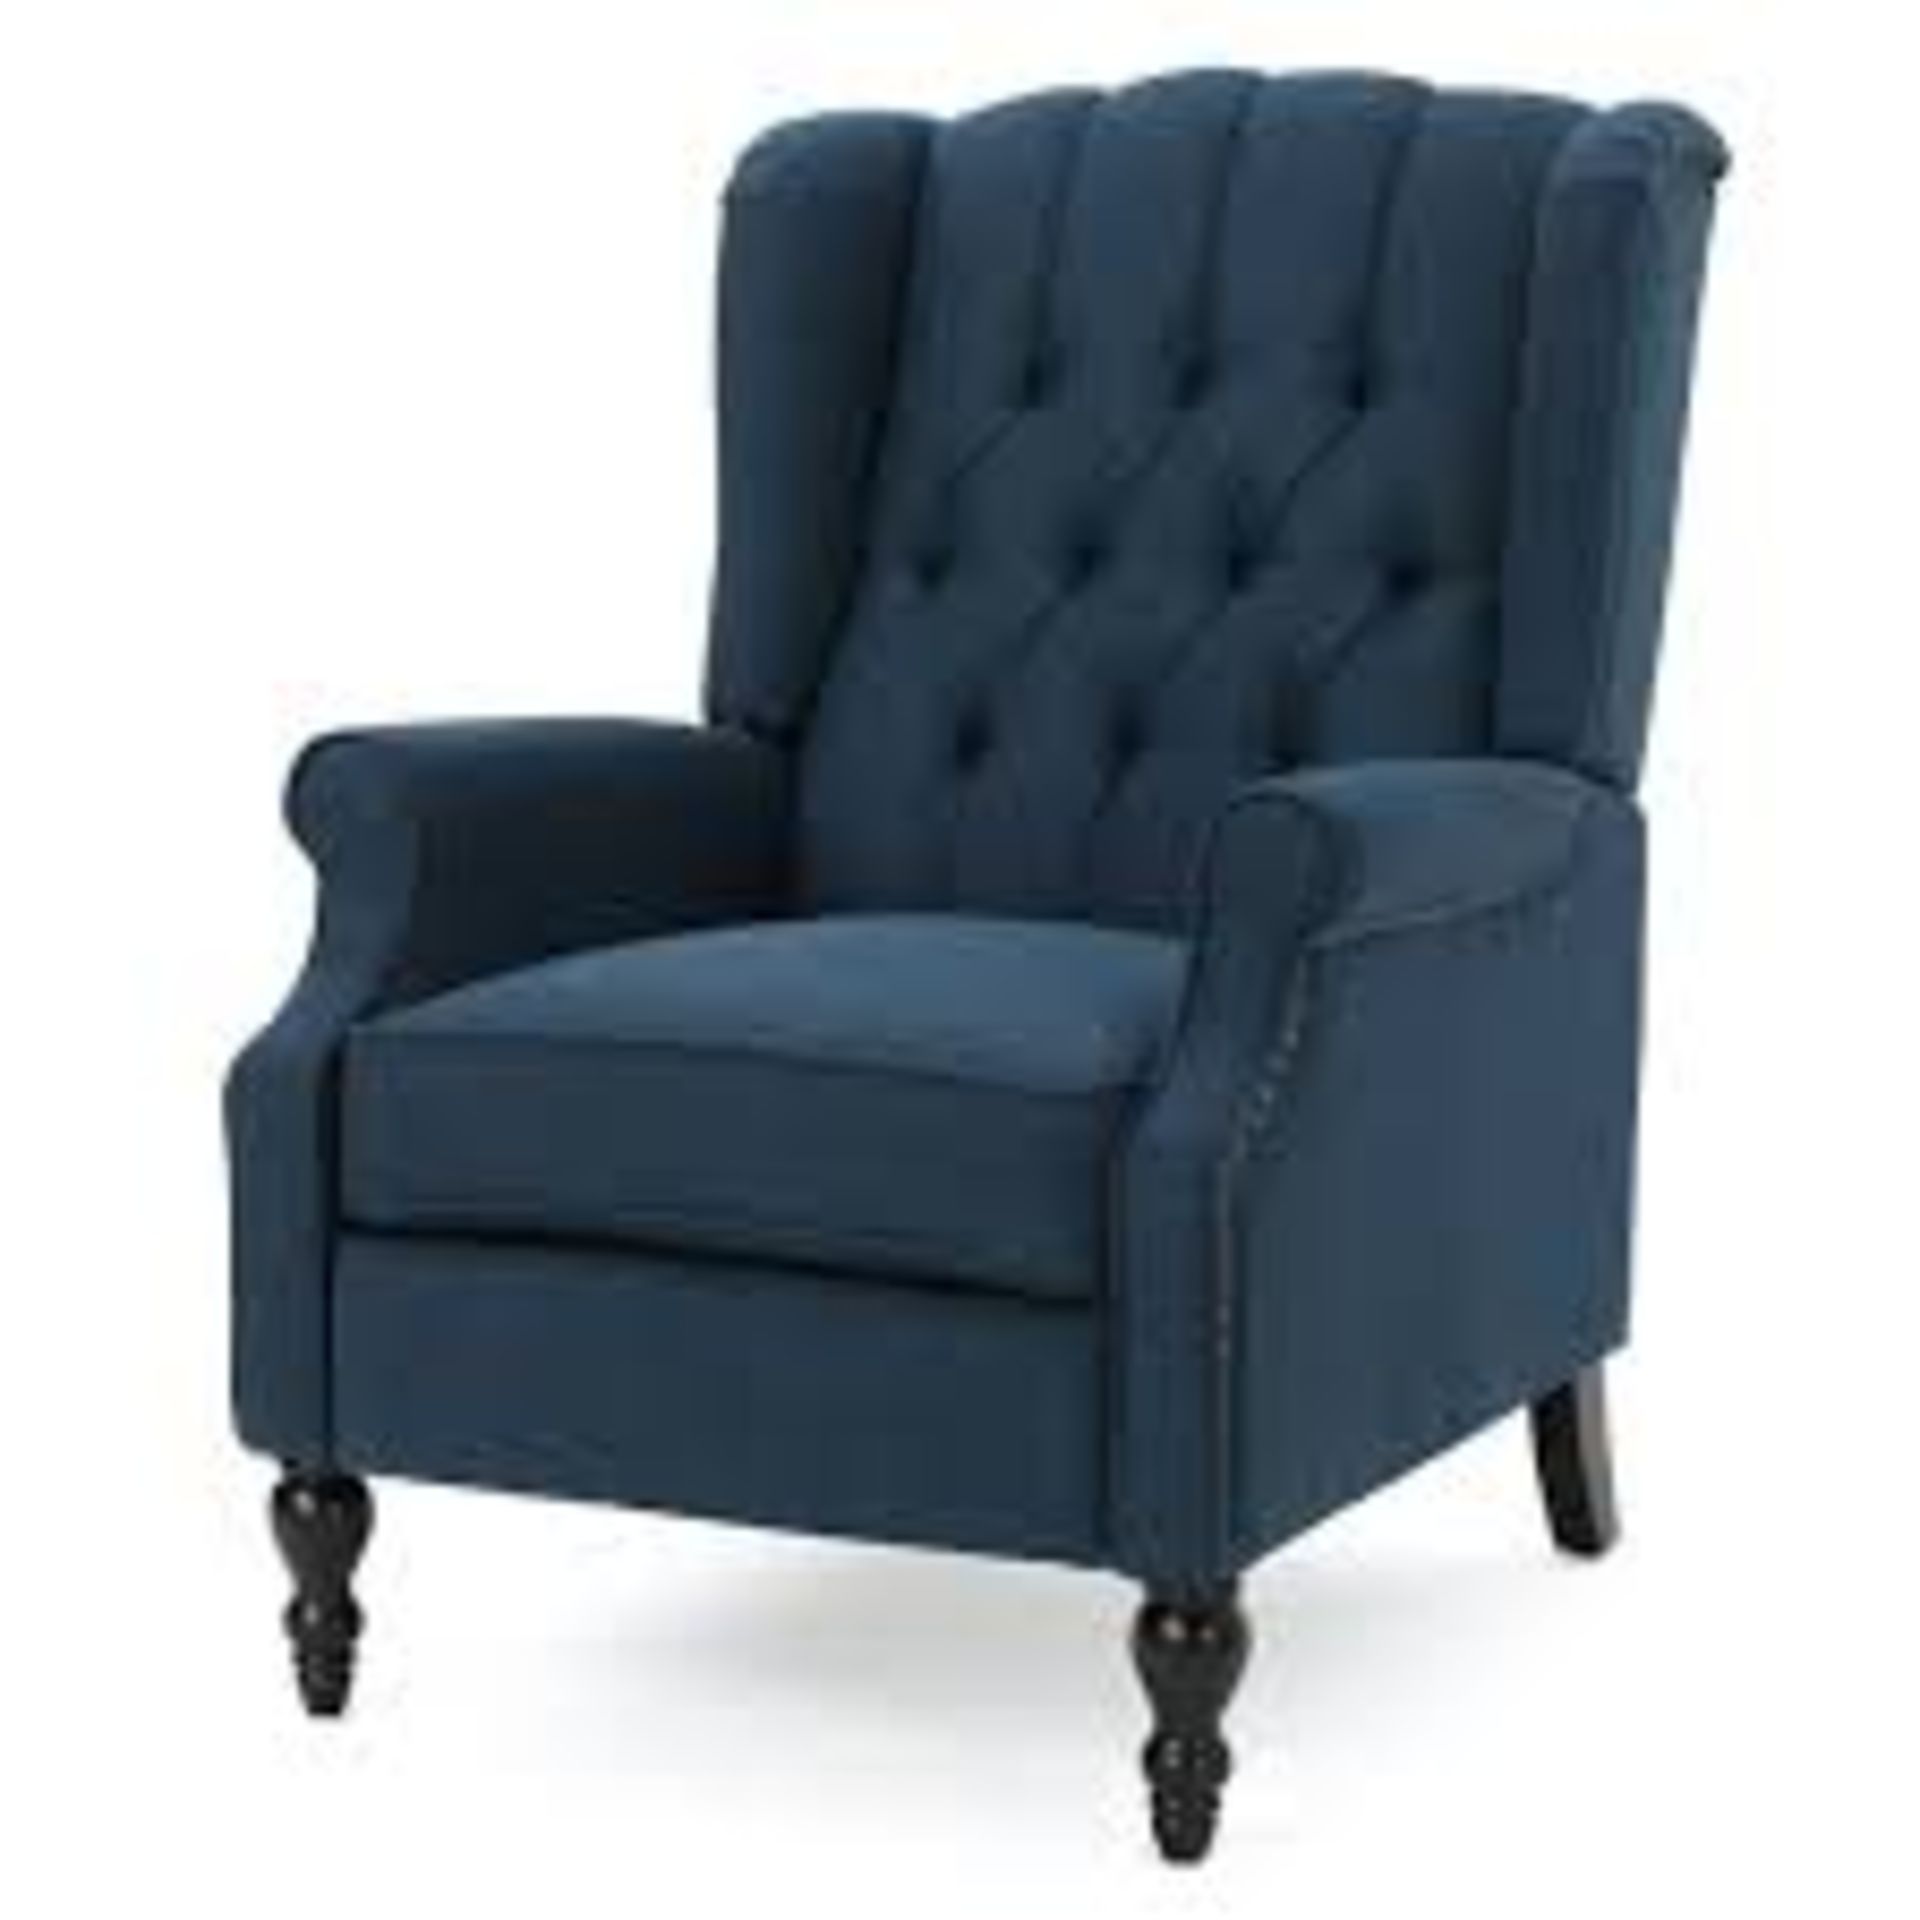 Boxed Hanley Manual Reclyner Wing Back Designer Dining Chair RRP £275 (18311) (Sourced From A High